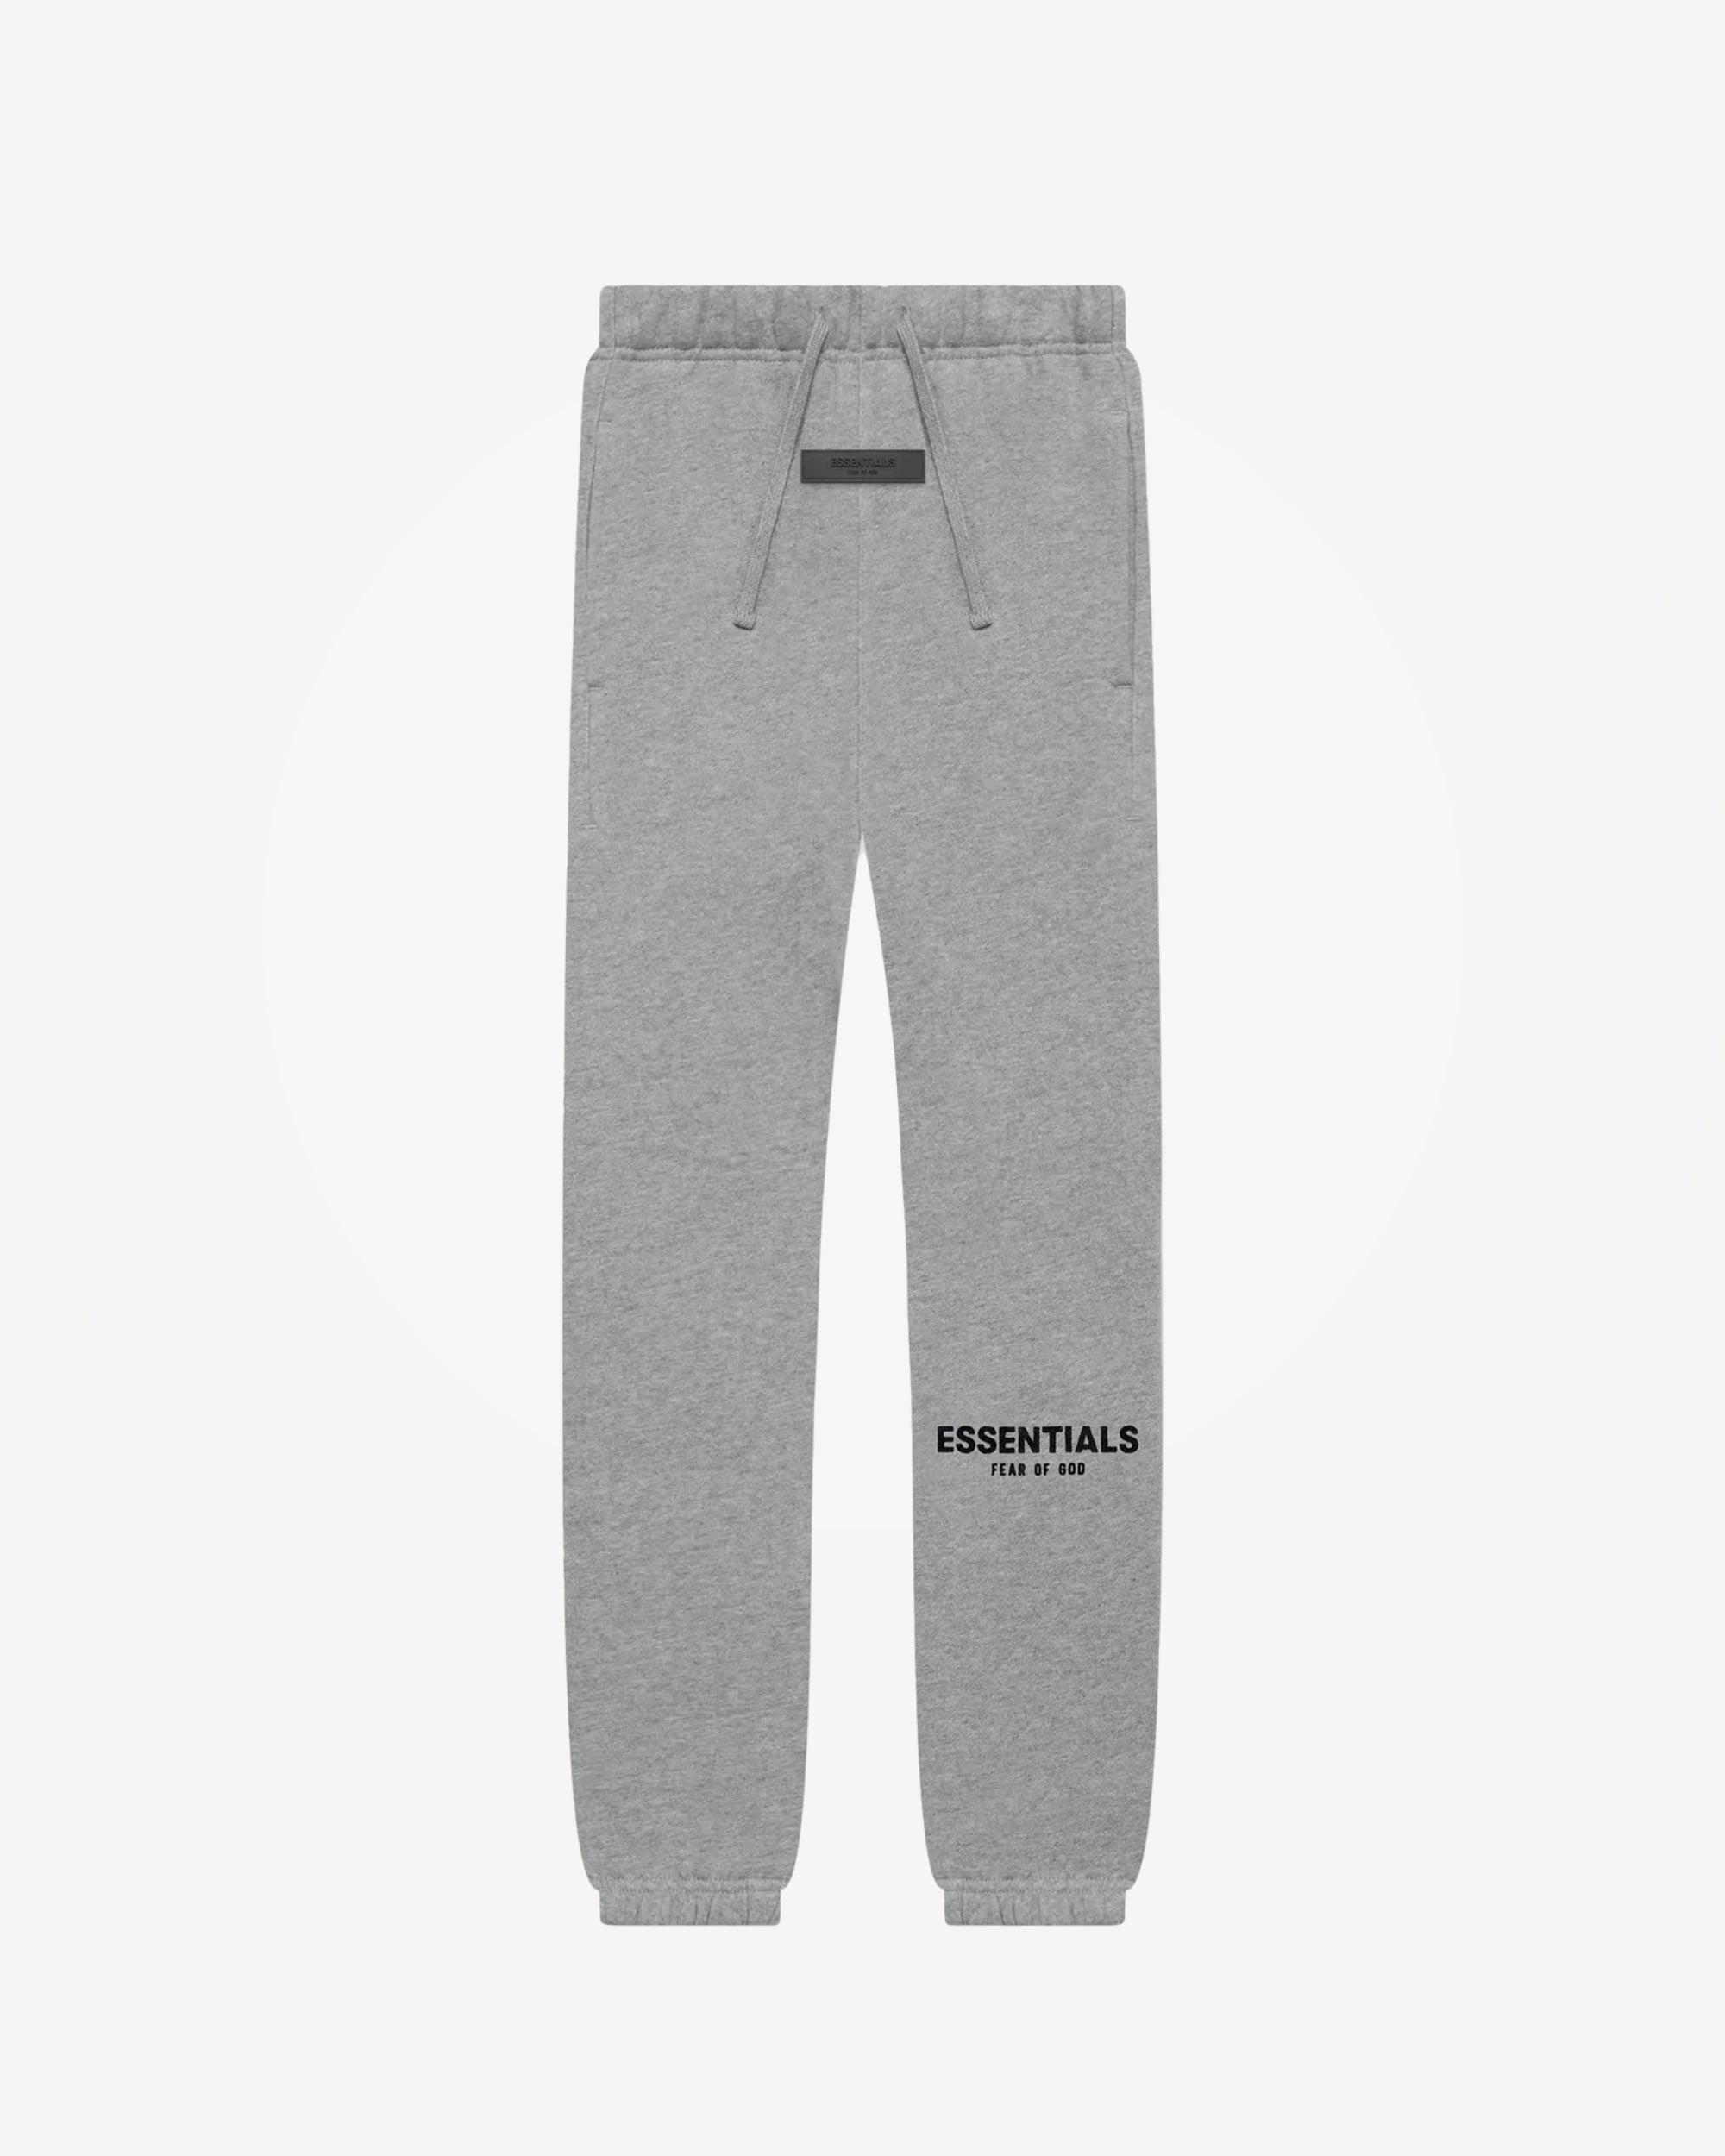 Kids' Core Collection Sweatpants in Dark Oatmeal